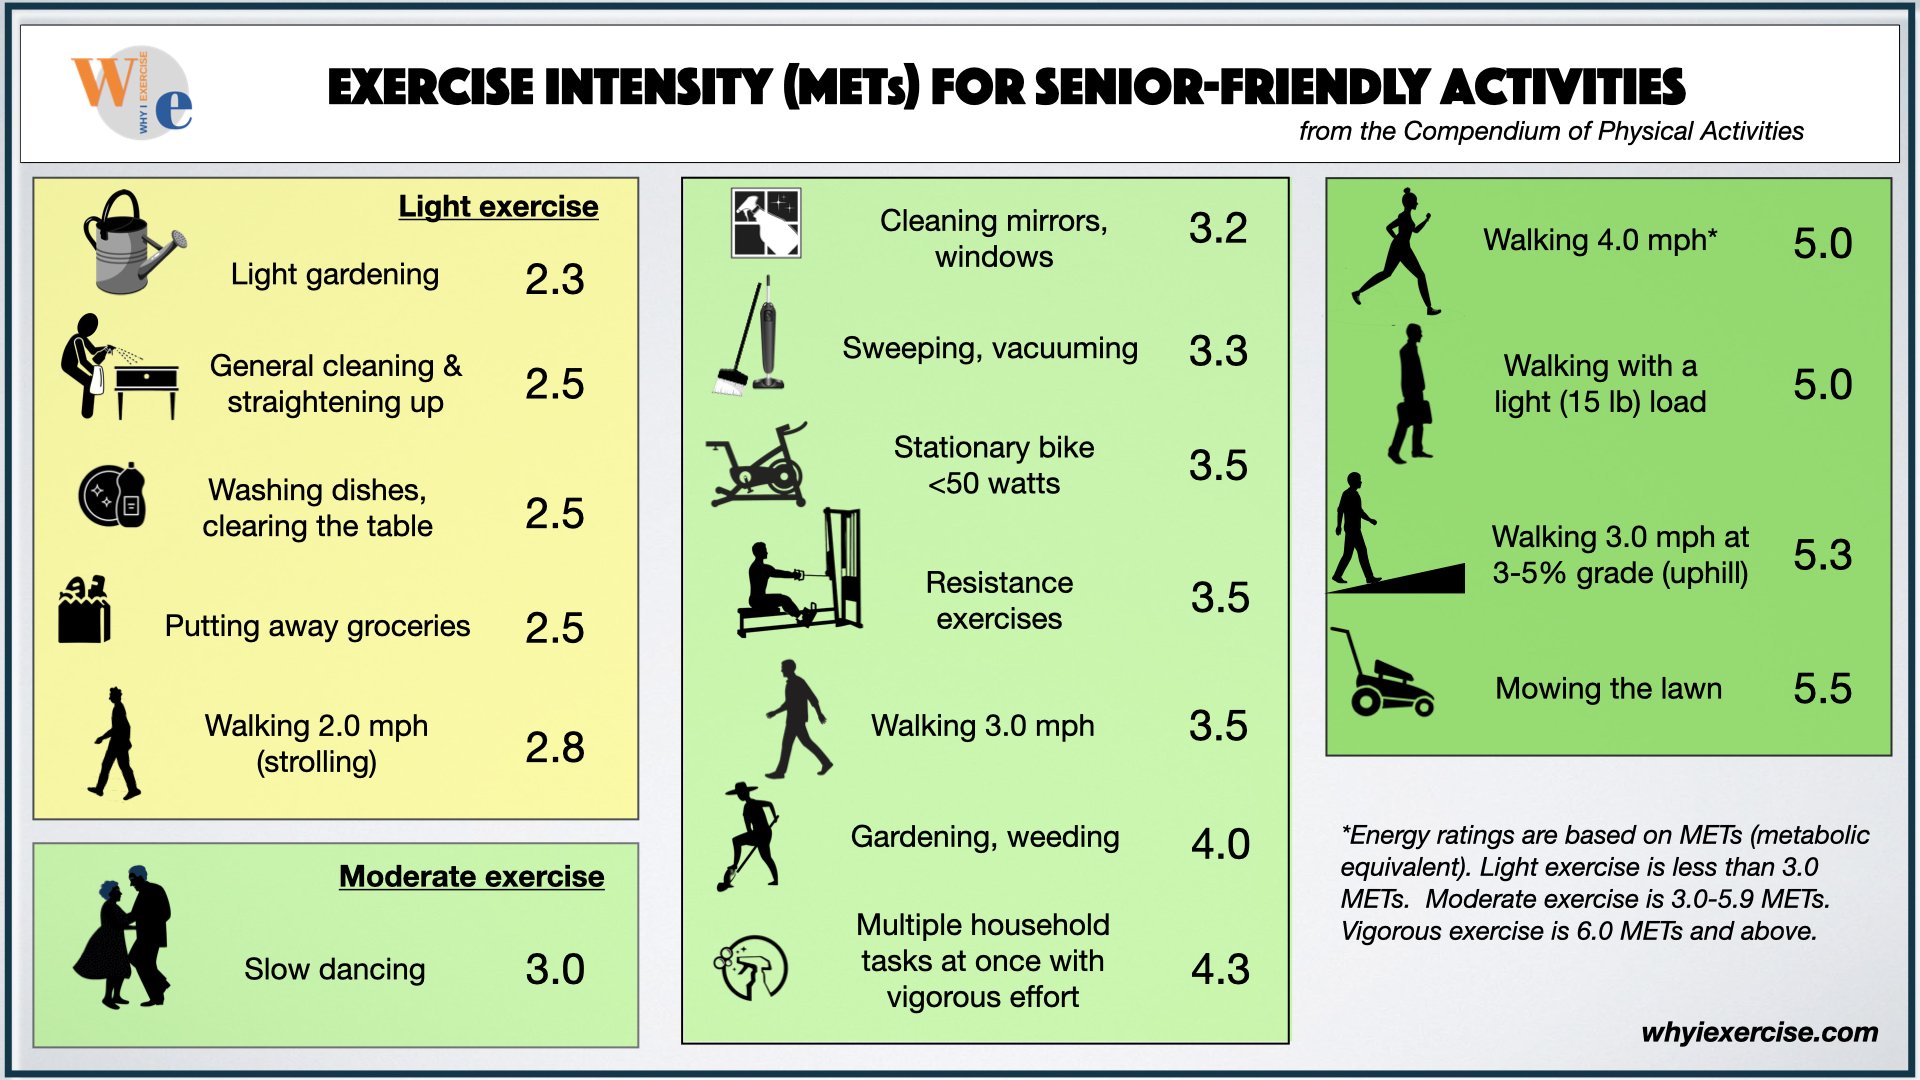 comparison of METs for senior-friendly exercise